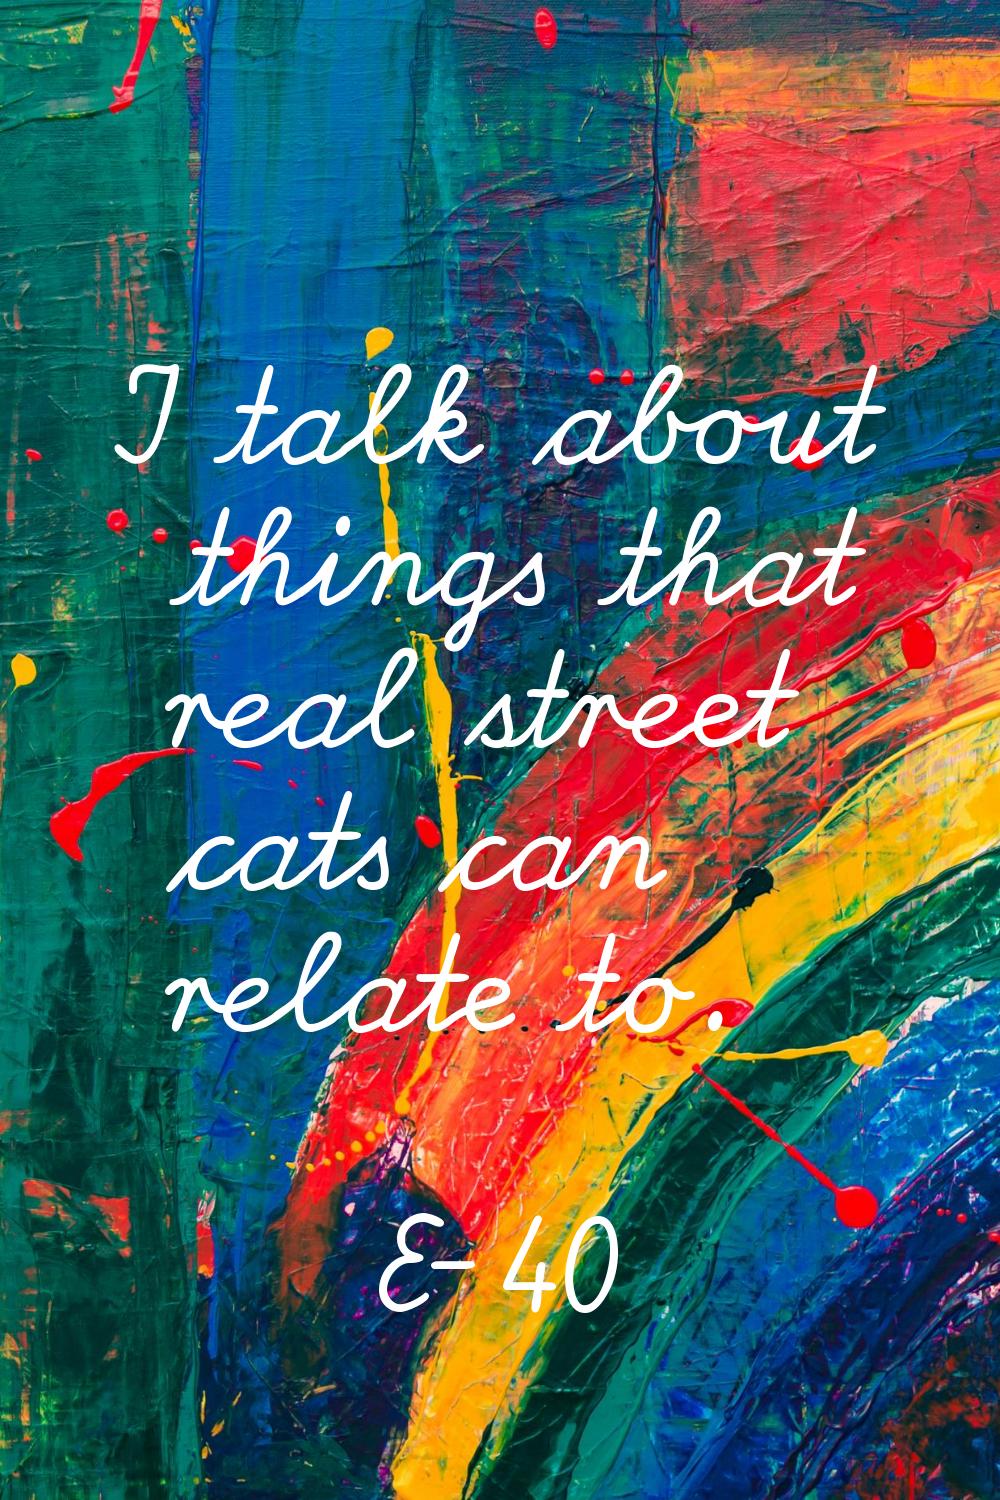 I talk about things that real street cats can relate to.